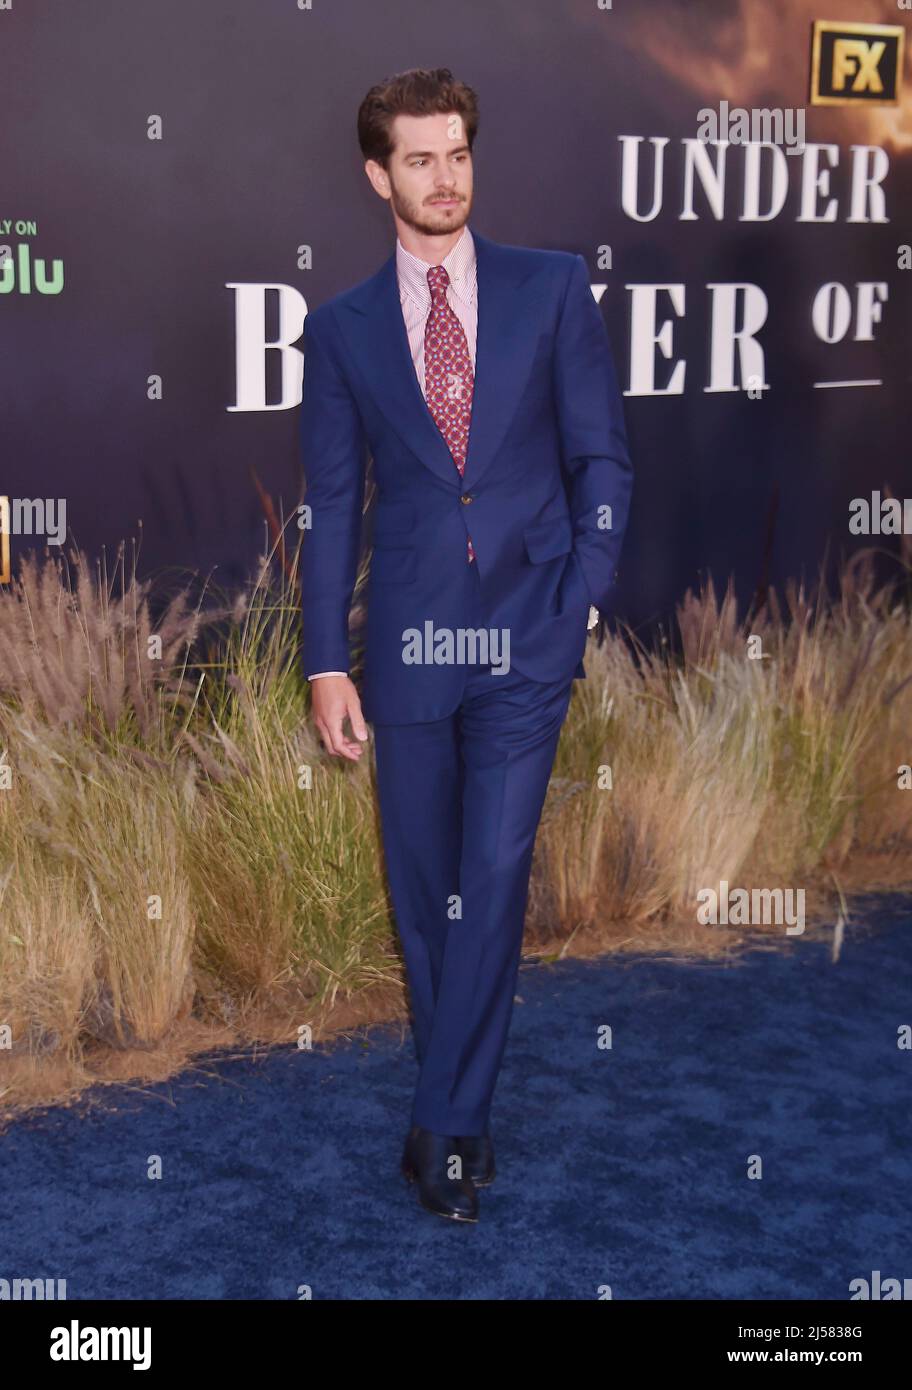 Hollywood, Ca. 20th Apr, 2022. Andrew Garfield attends Premiere Of FX's "Under The Banner Of Heaven" at The Hollywood Athletic Club on April 20, 2022 in Hollywood, California. Credit: Jeffrey Mayer/Jtm Photos/Media Punch/Alamy Live News Stock Photo